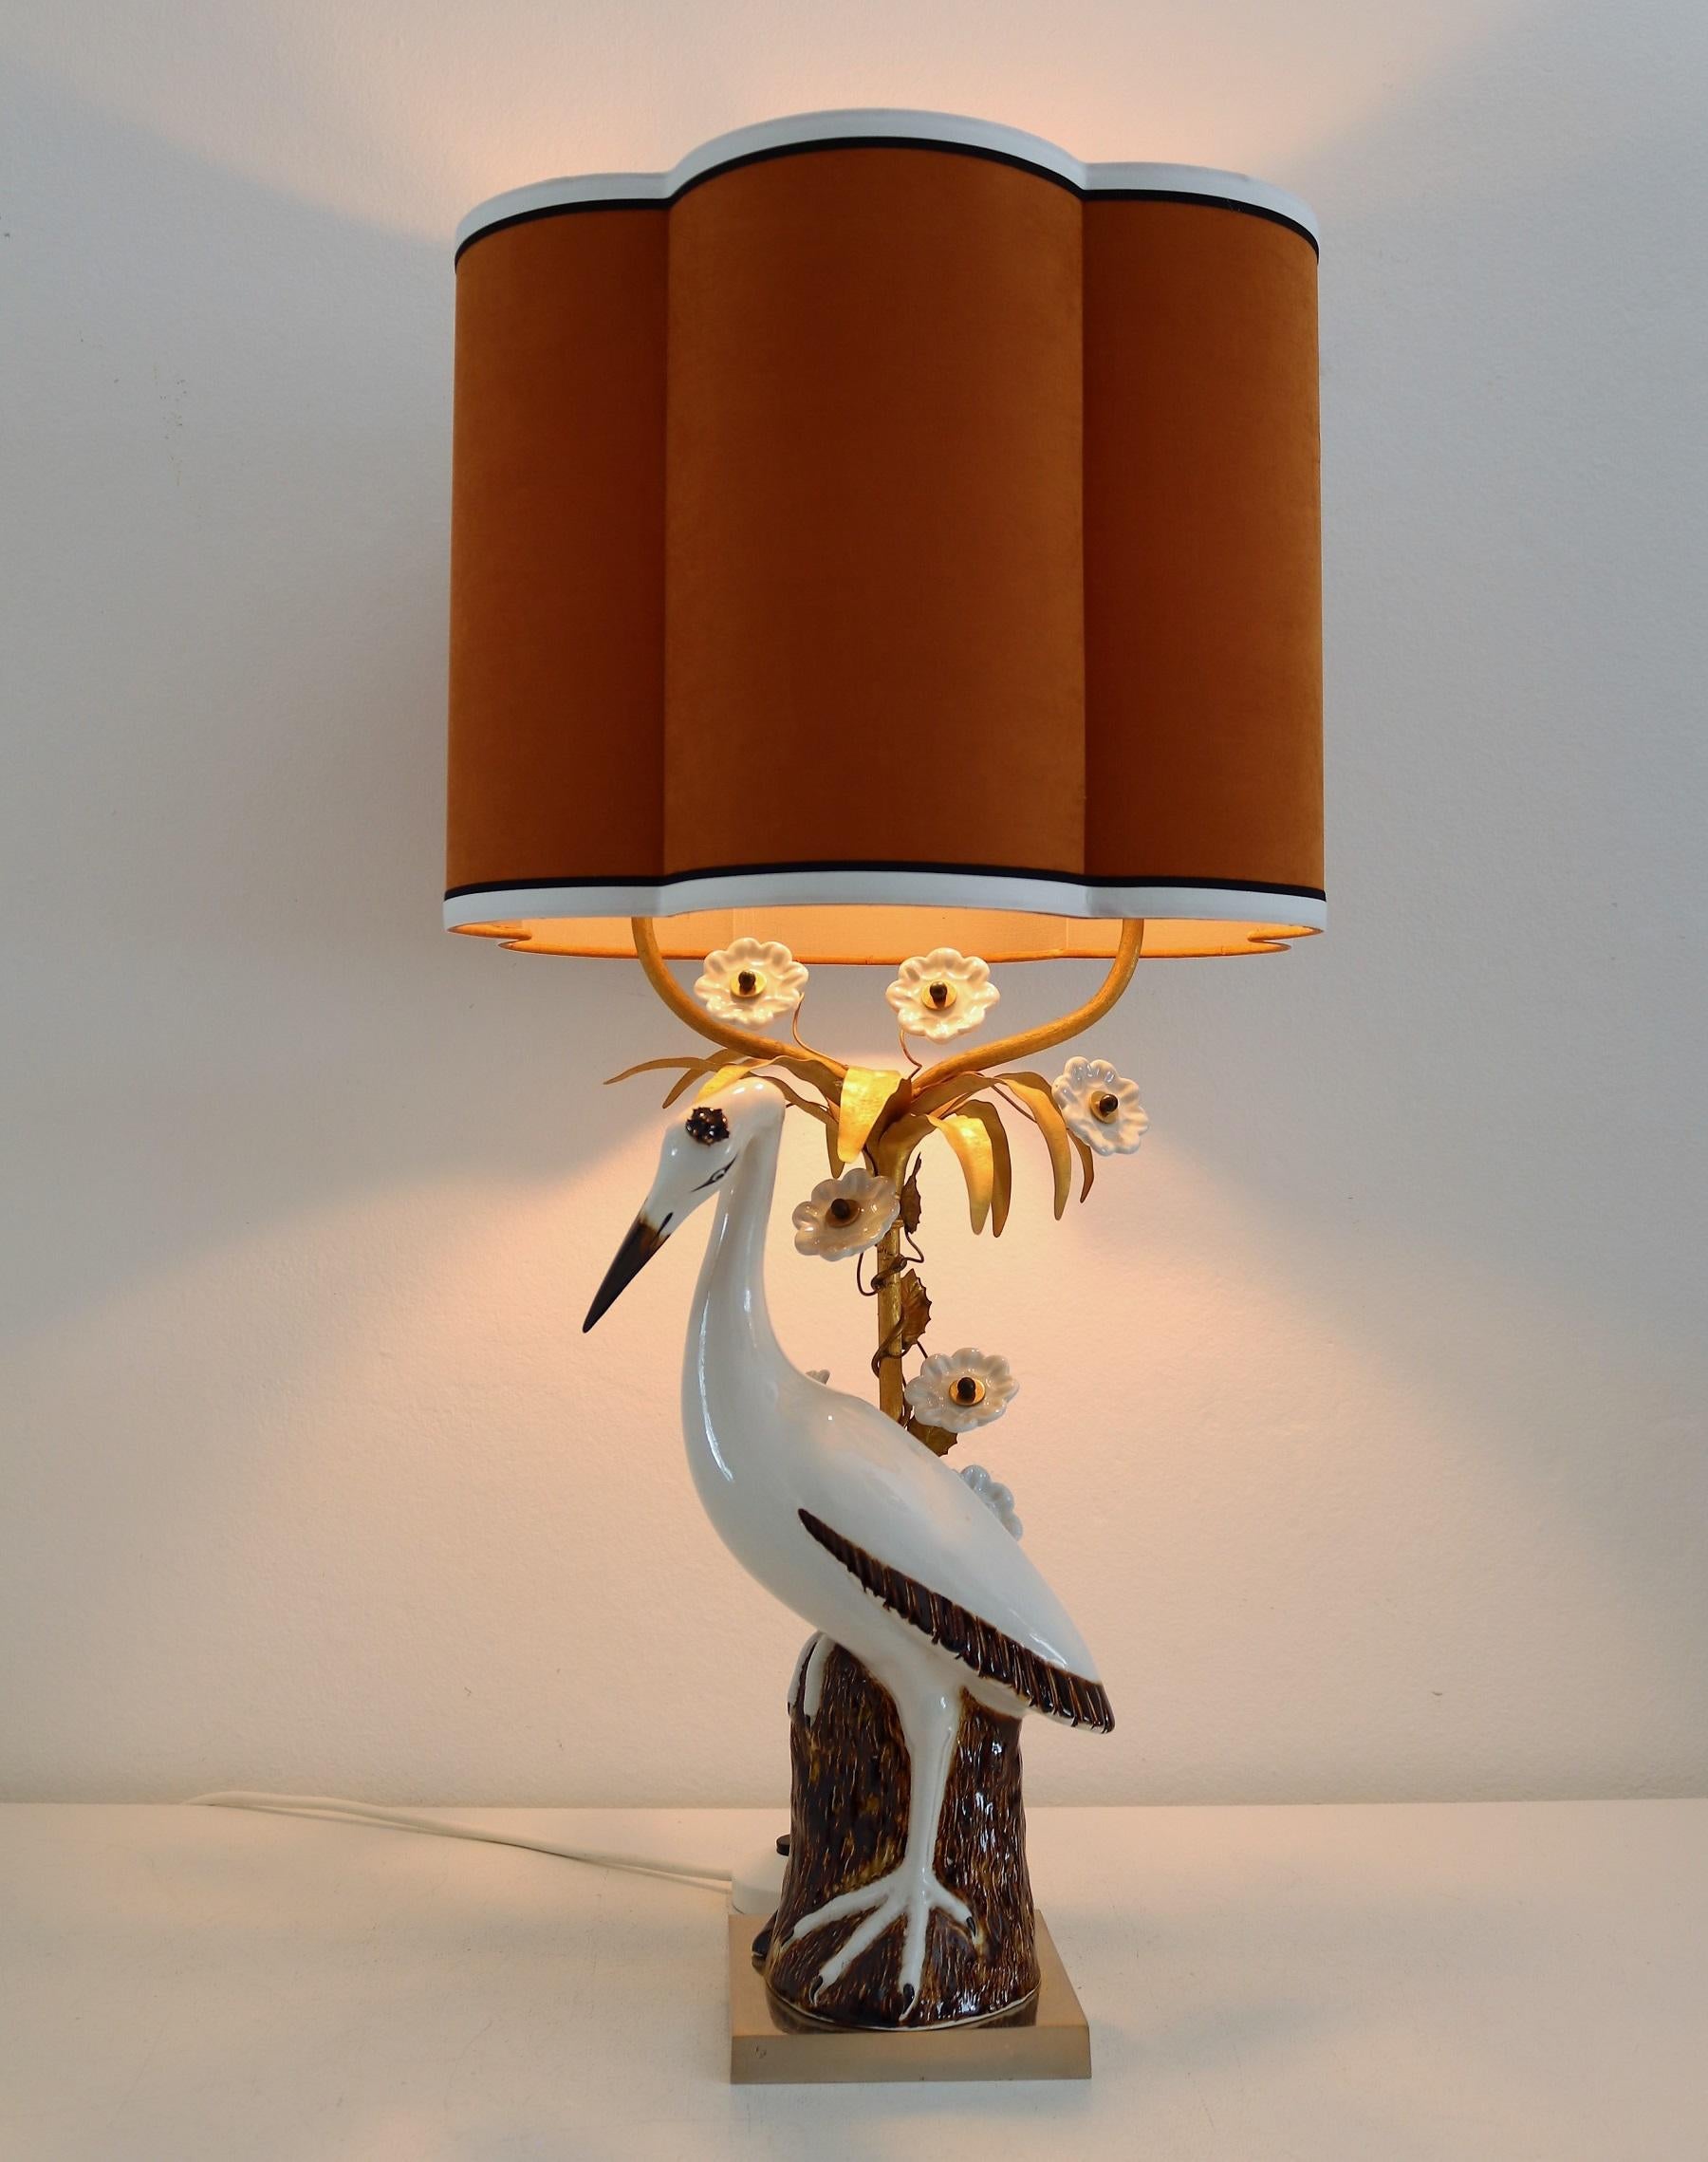 French Table Lamp with Porcelain Crane or Heron and Flowers, 1970s For Sale 1